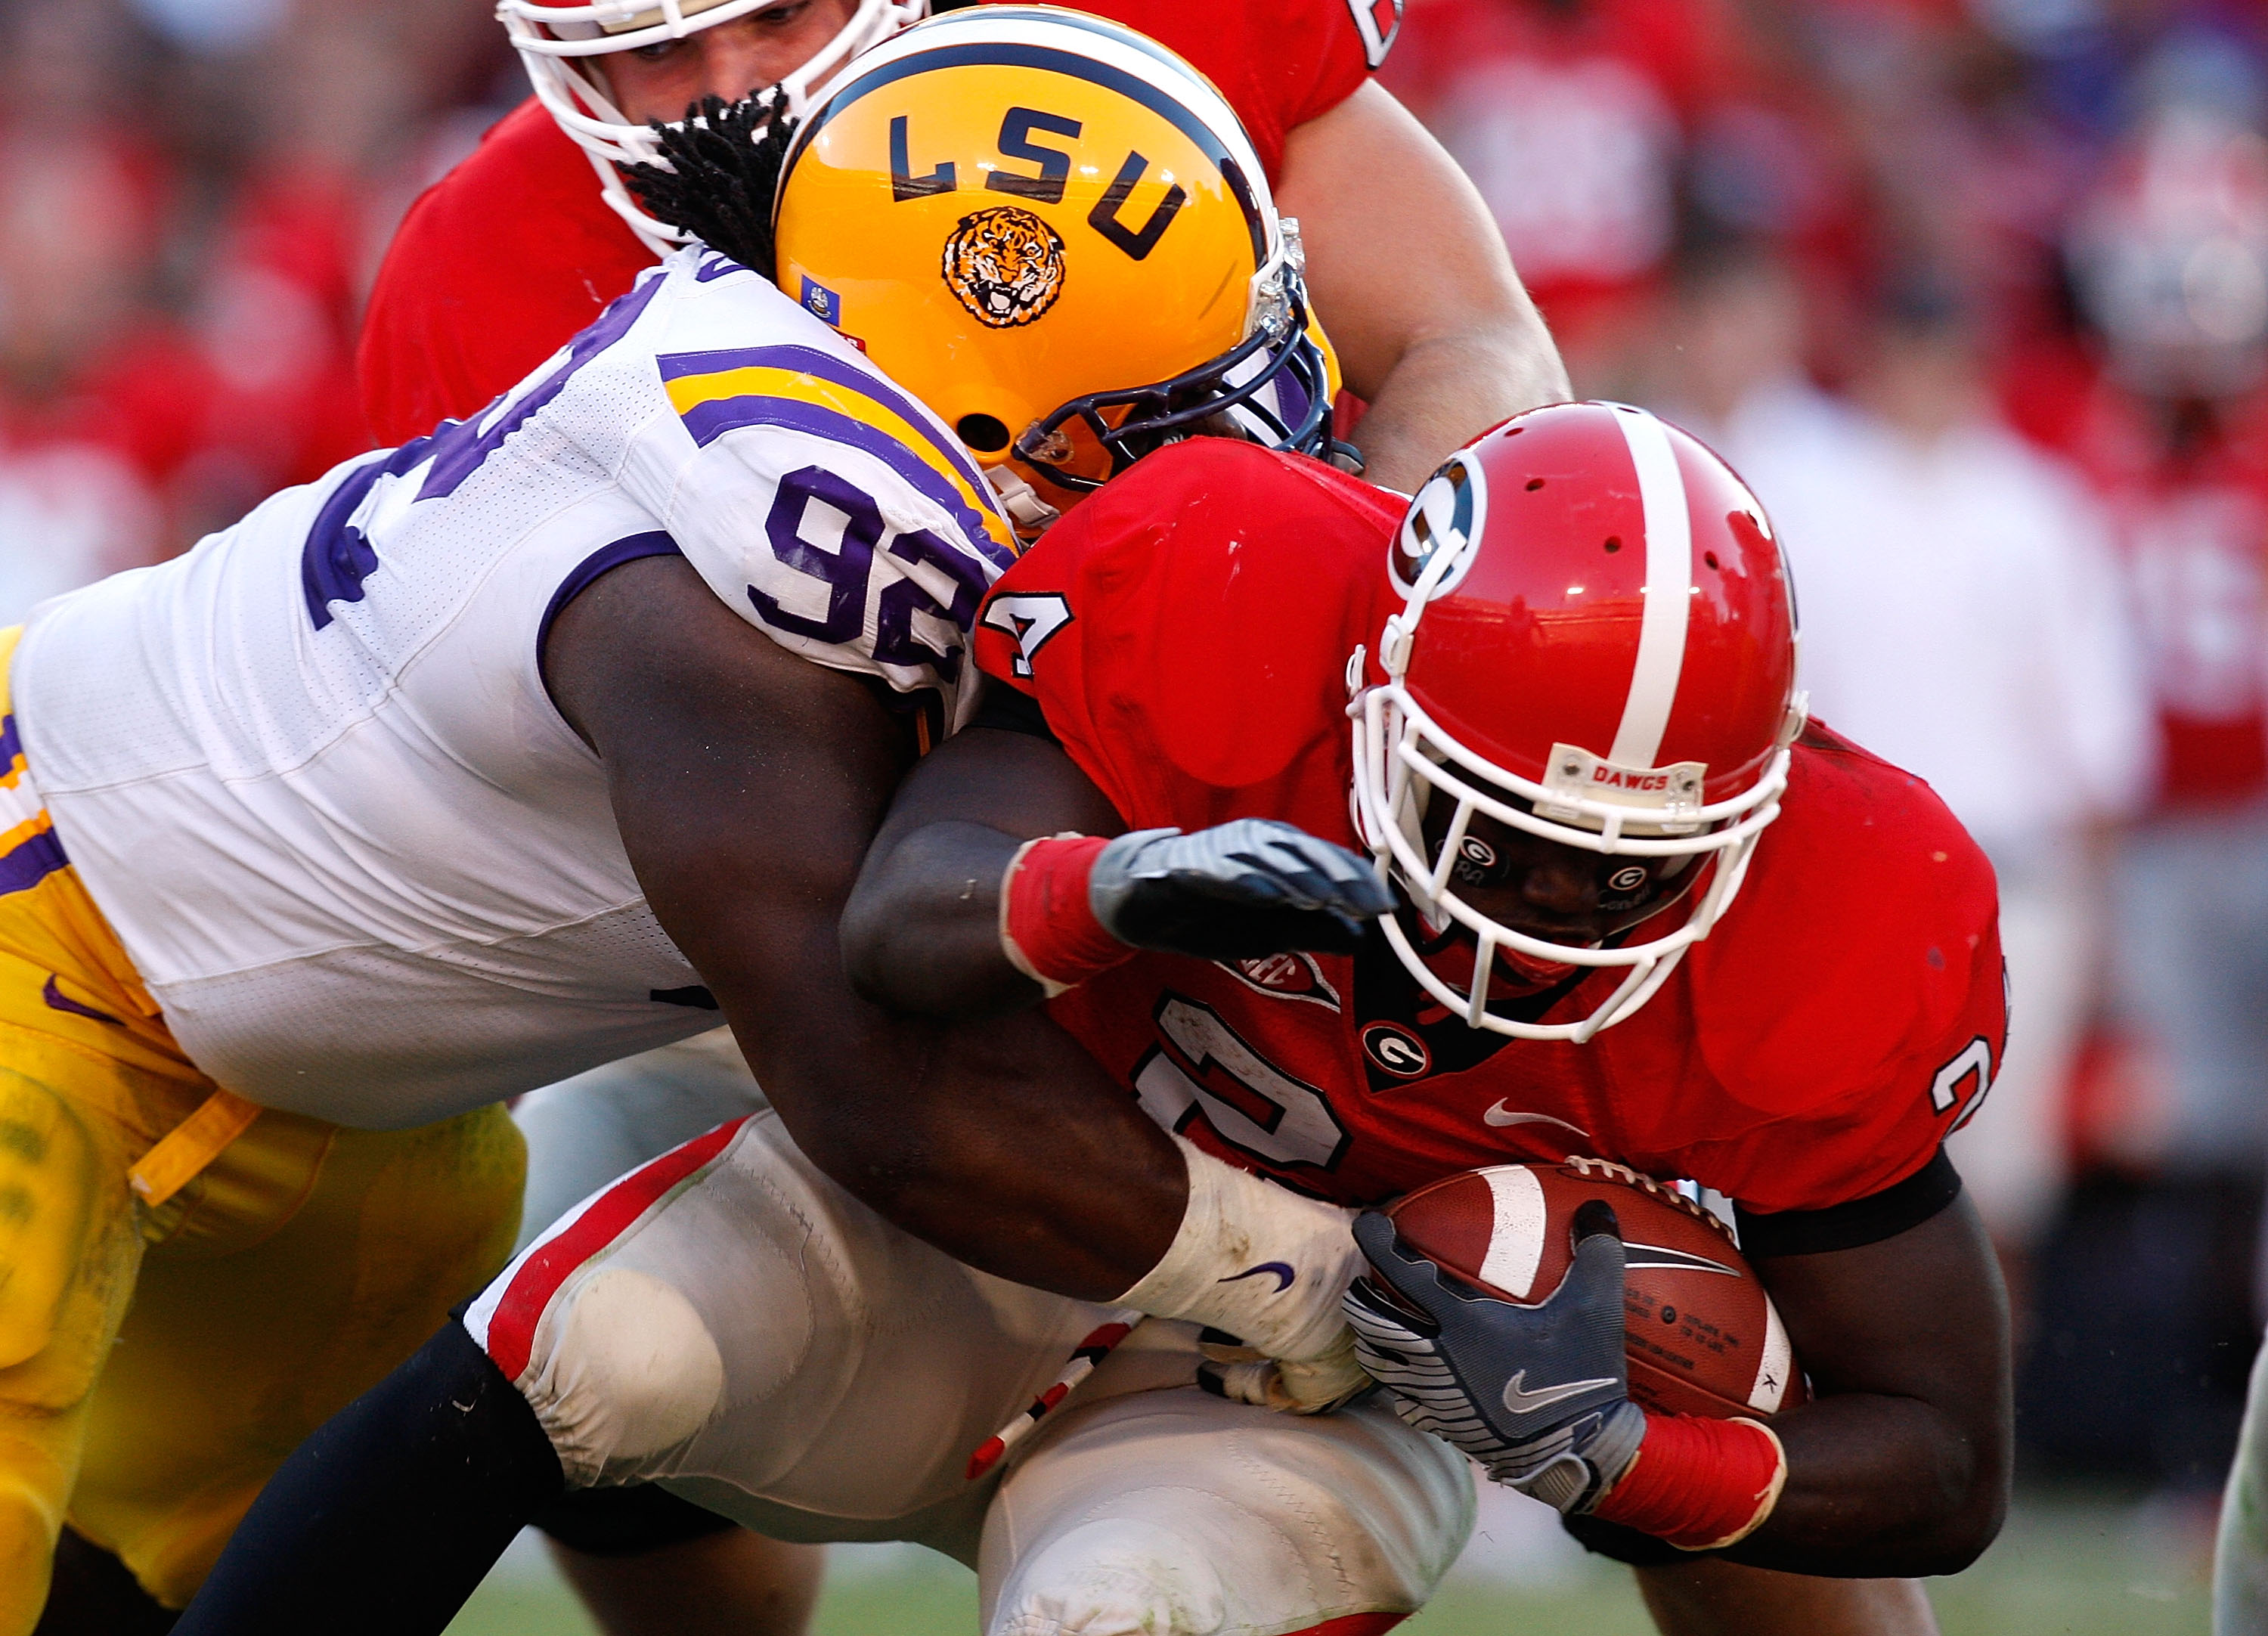 ATHENS, GA - OCTOBER 03: Drake Nevis #92 of the Louisiana State University Tigers tackles Washaun Ealey #24 of the Georgia Bulldogs at Sanford Stadium on October 3, 2009 in Athens, Georgia. (Photo by Kevin C. Cox/Getty Images)